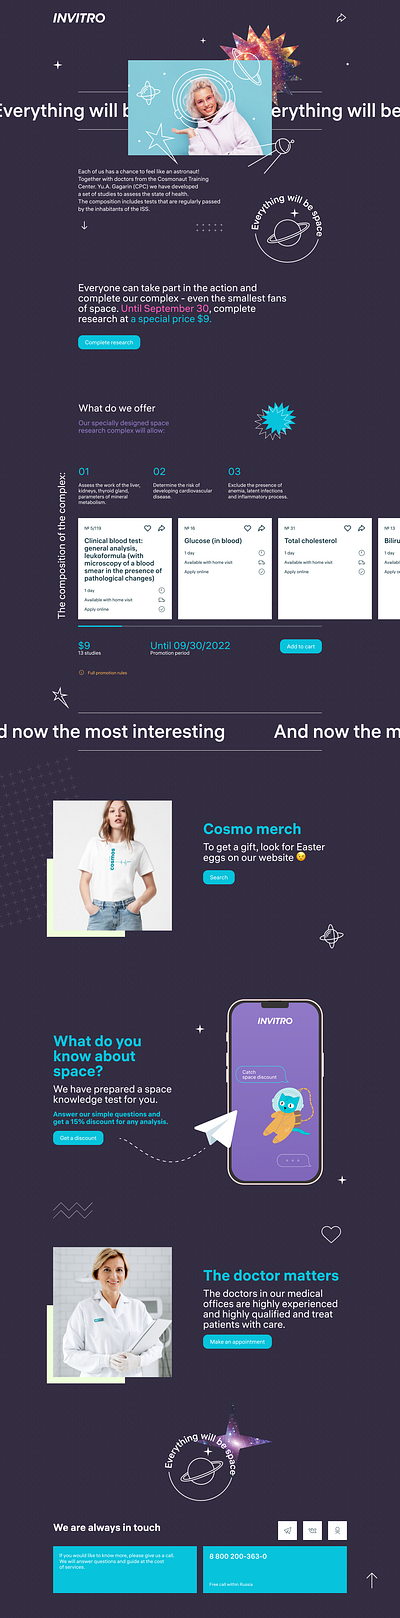 Promotional landing page for the company invitro figma landing page ui